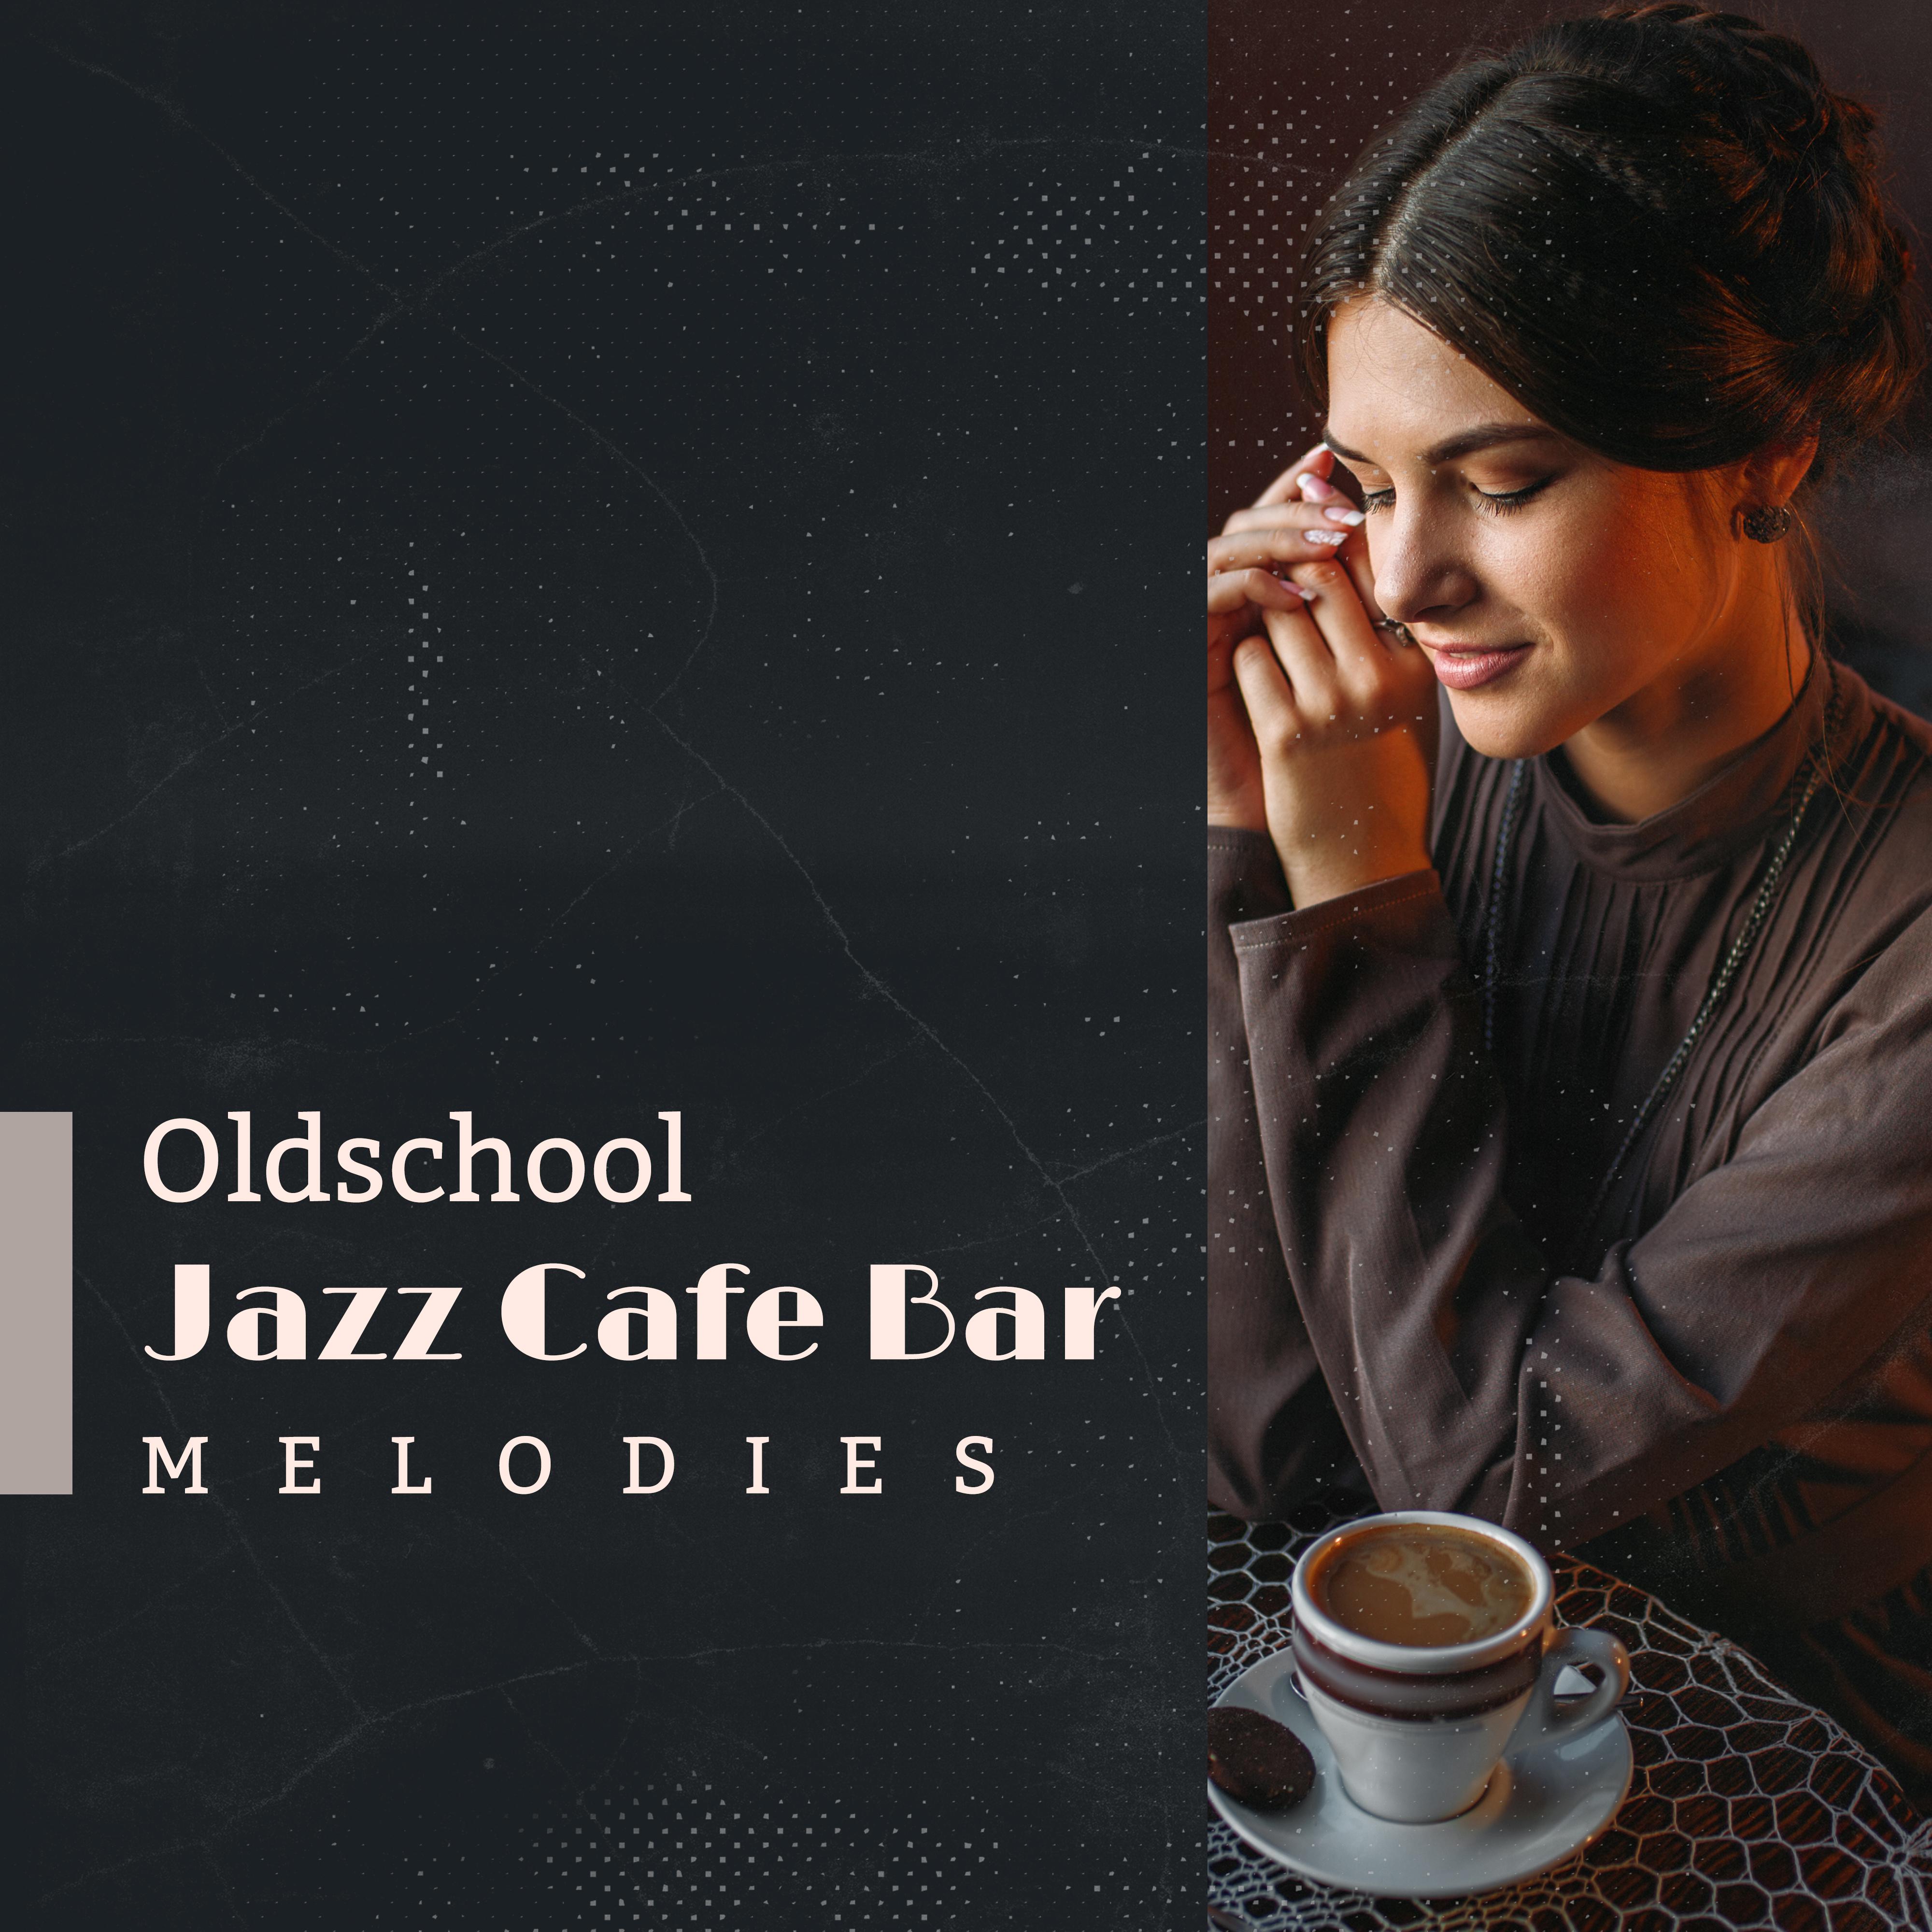 Oldschool Jazz Cafe Bar Melodies  2019 Swing Instrumental Jazz for Vintage Jazz Club, Cafe or Bar, Music in Style from the 20' s, Nostalgic Sounds of Piano, Contrabass, Sax, Trombone  Others